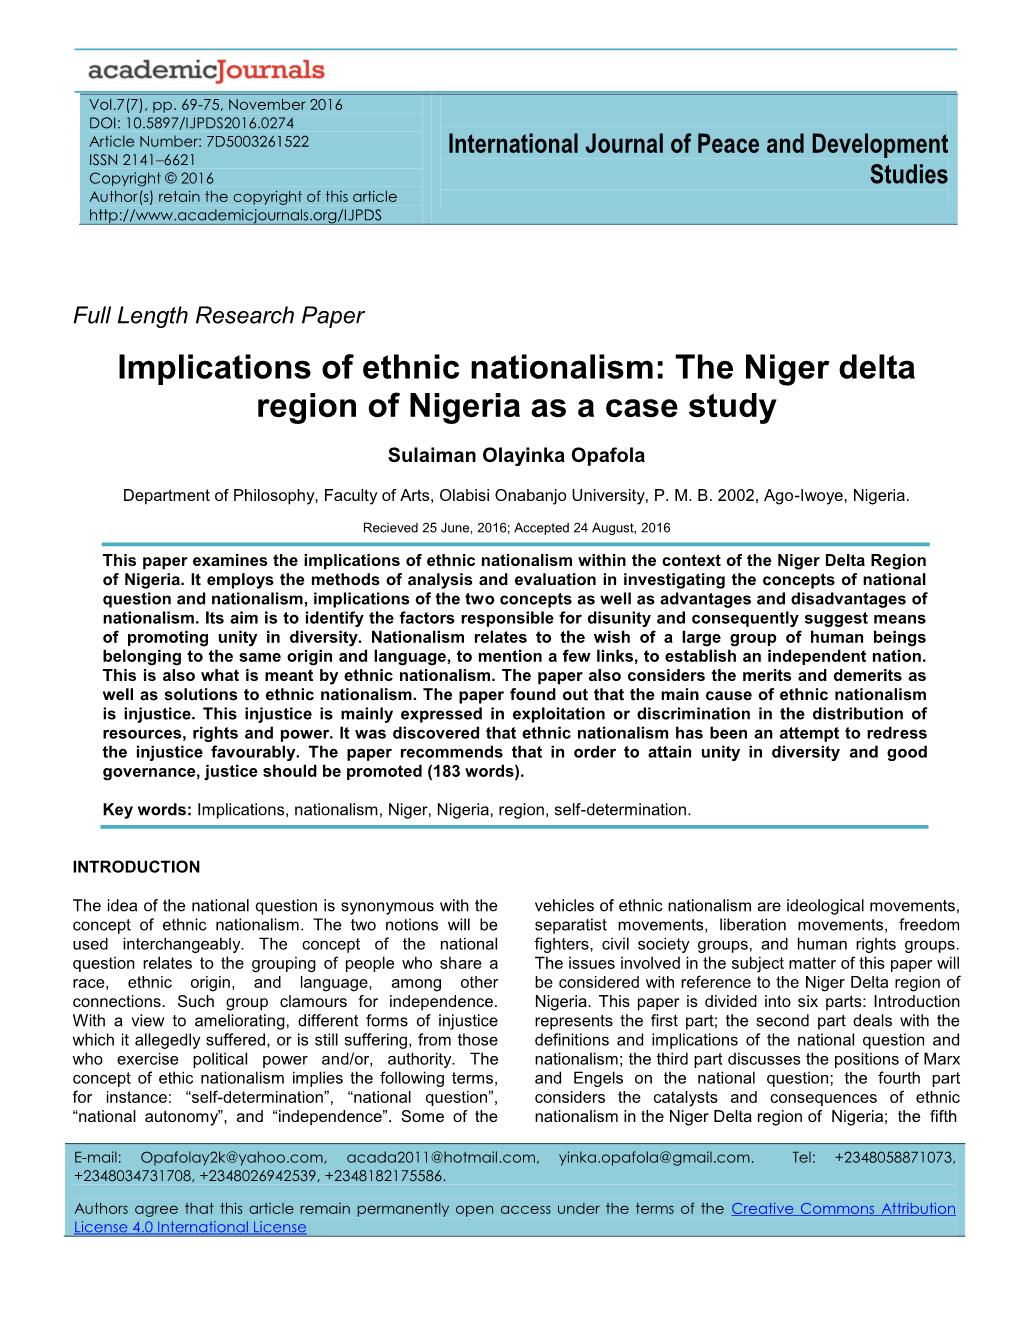 Implications of Ethnic Nationalism: the Niger Delta Region of Nigeria As a Case Study